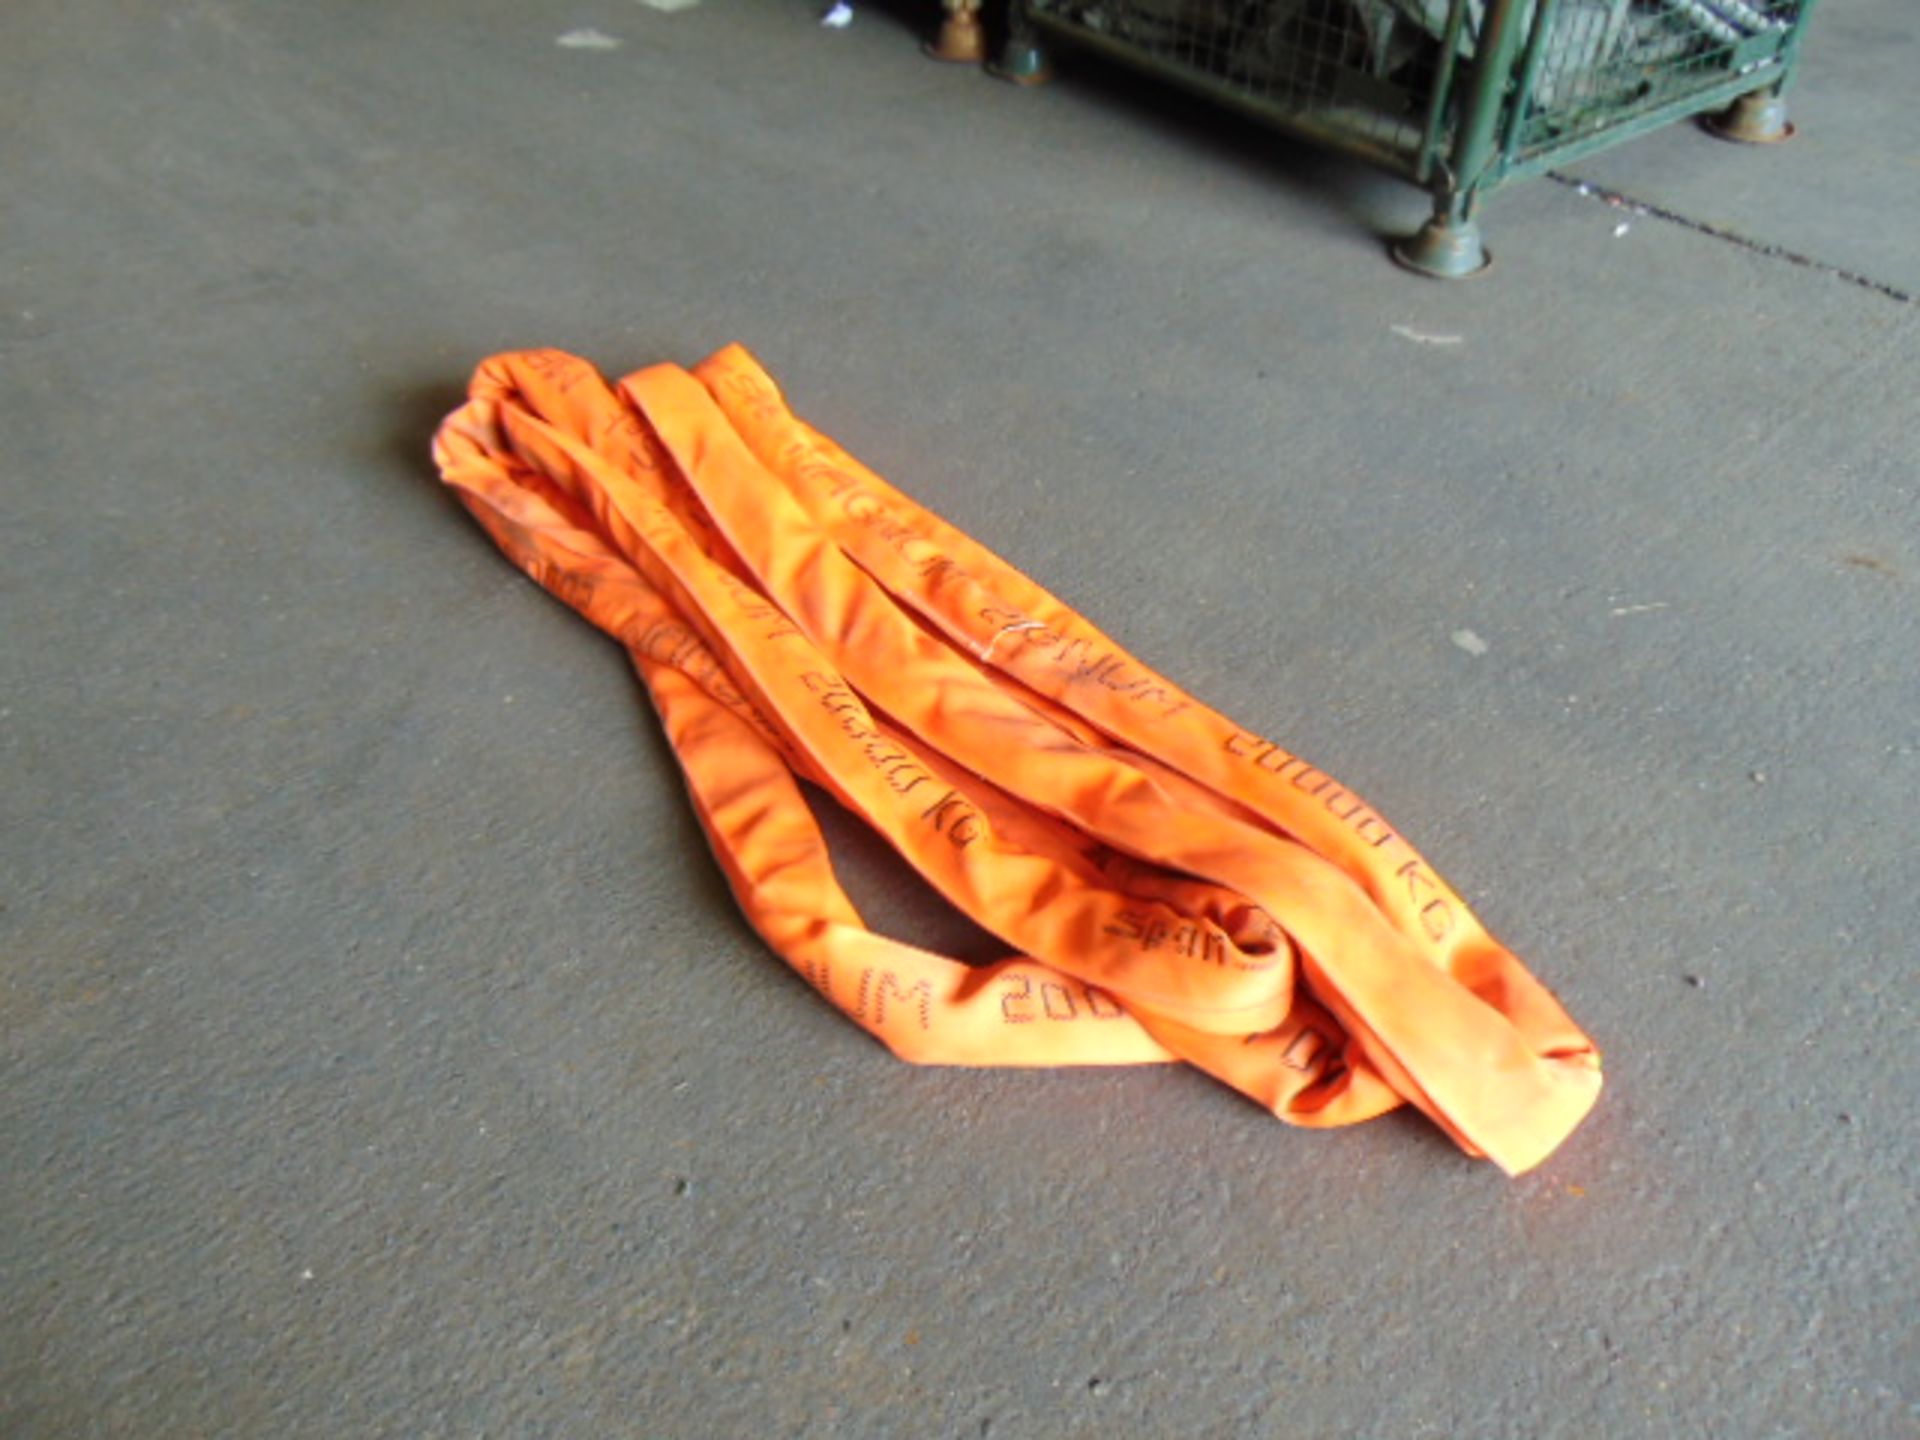 New Unused SpanSet Magnum 20,000kg Lifting/Recovery Strop from MOD - Image 5 of 7